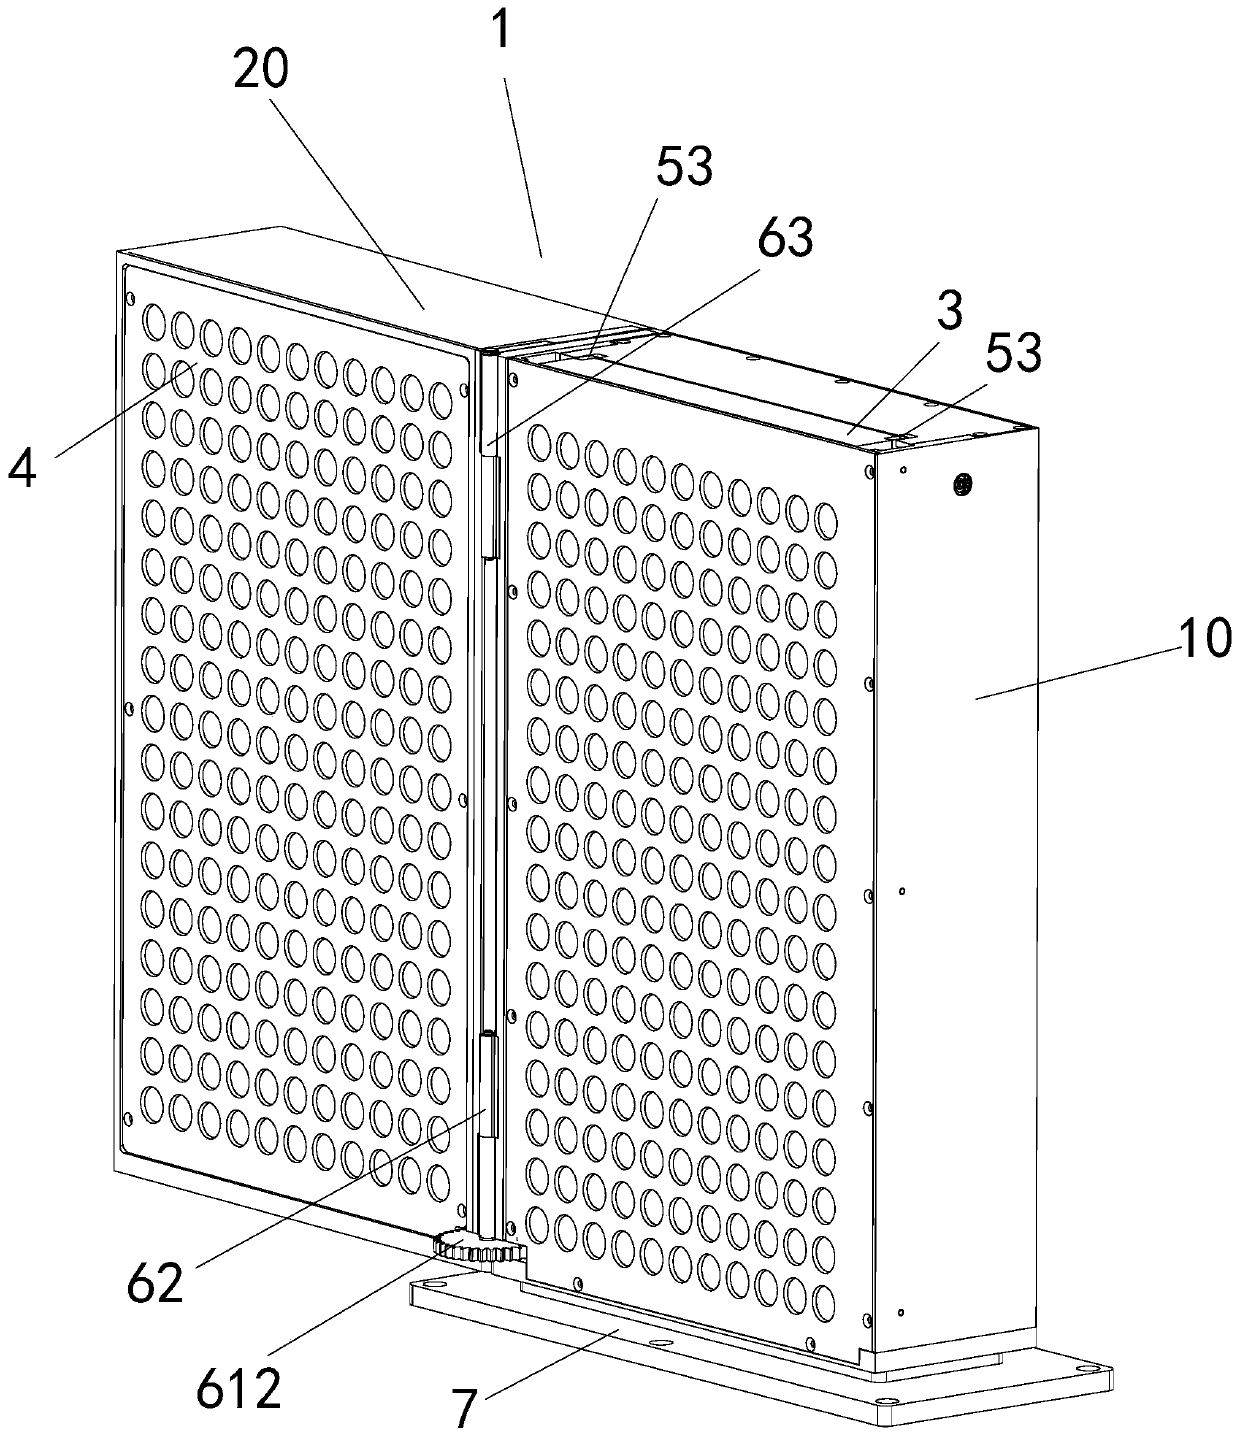 Deployable experiment box and material outboard exposure device